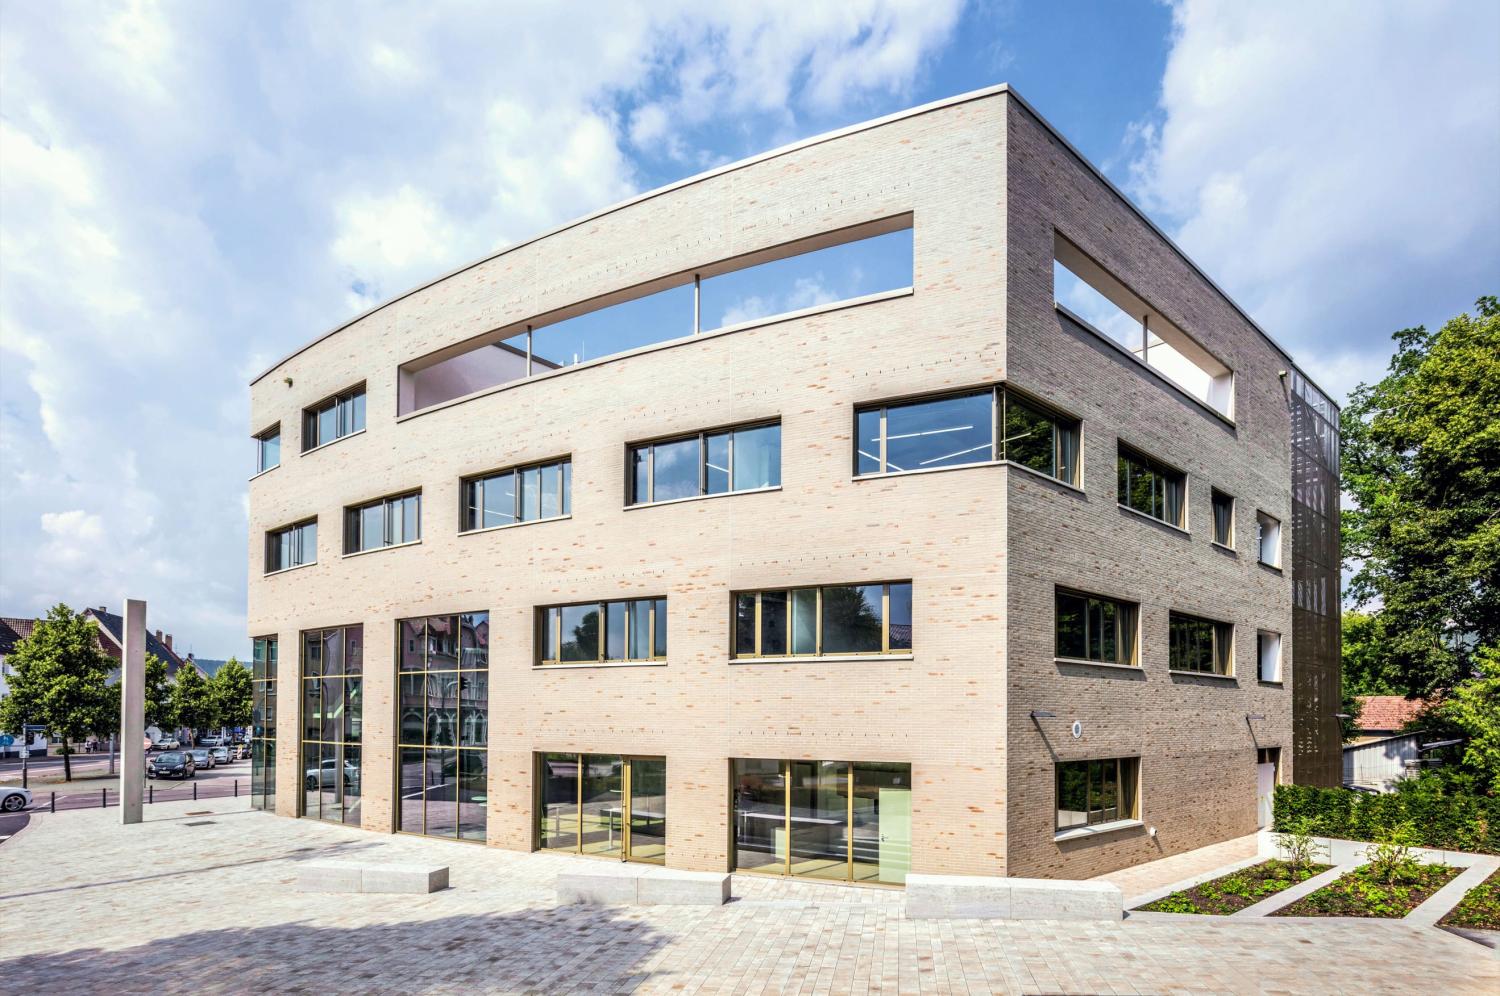 IFC Innovation and Research Centre Tuttlingen